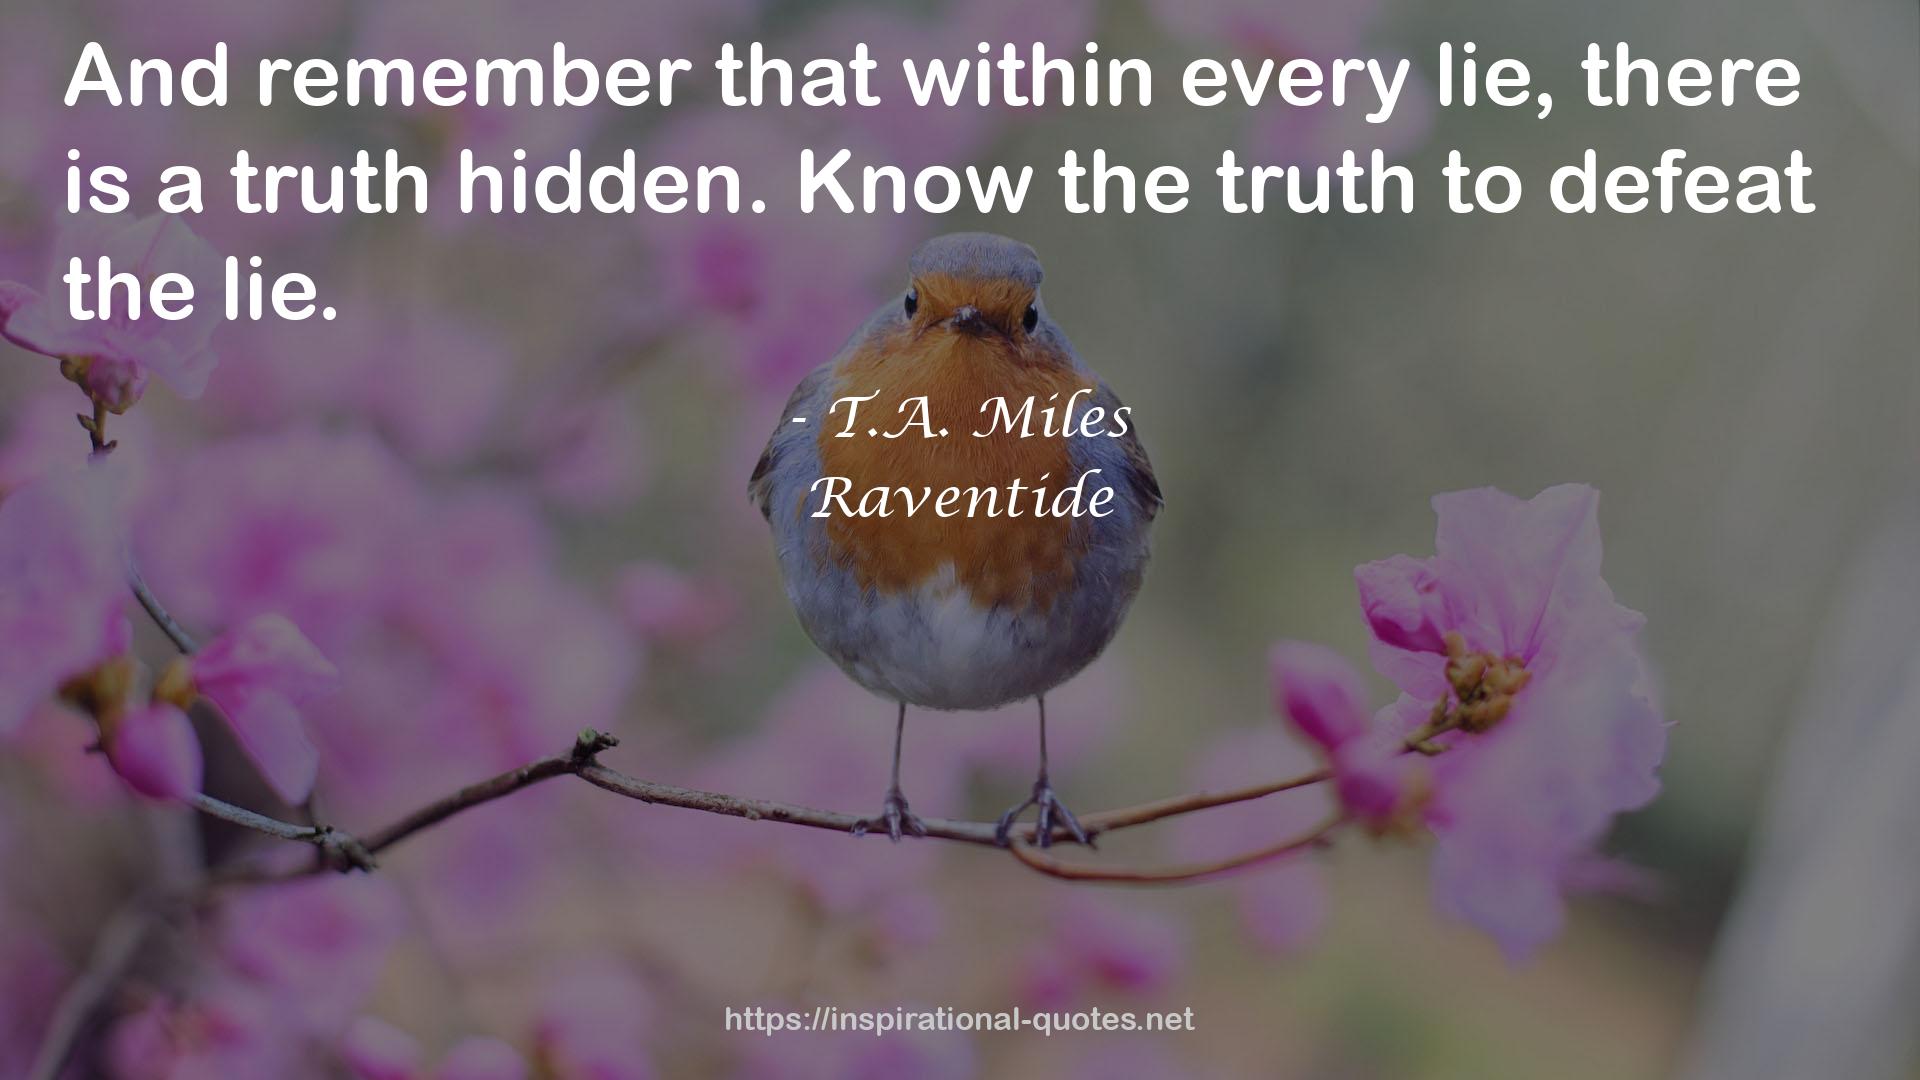 T.A. Miles QUOTES